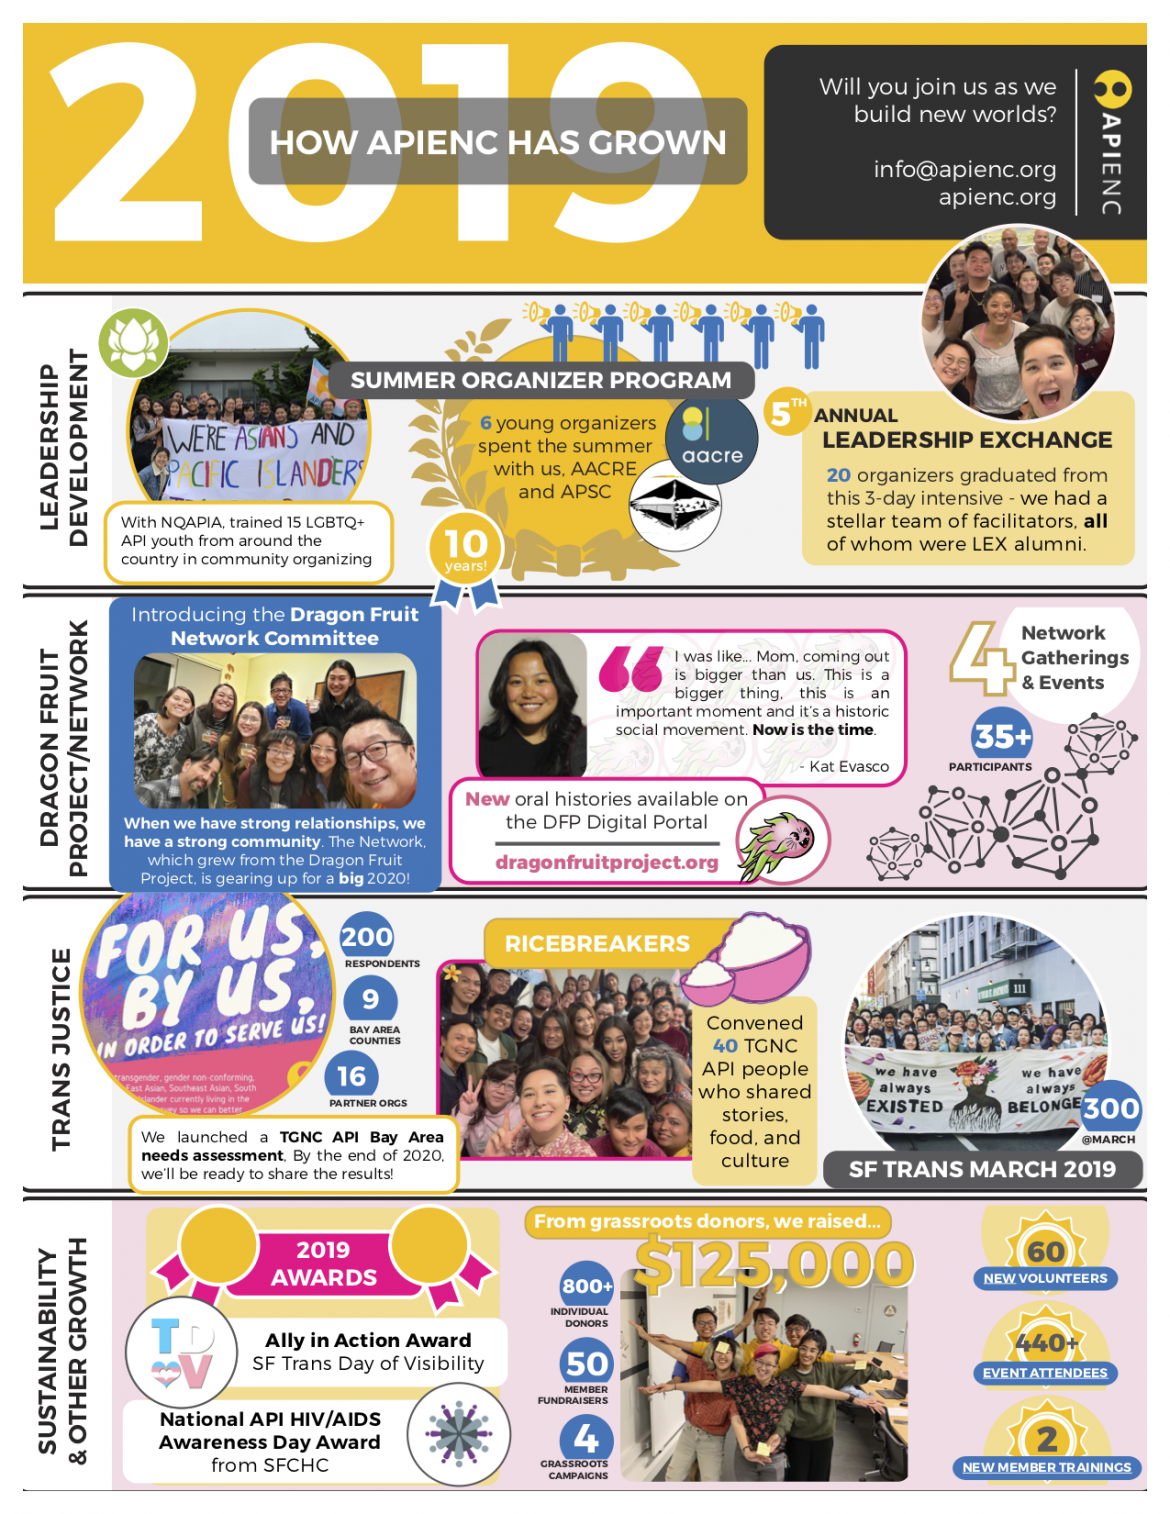 Image description: colorful infographic titled "2019: How APIENC Has Grown", describing accomplishments in Leadership Development, Dragon Fruit Project/Network, Trans Justice, and Sustainability & Other Growth. Graphic by Cynthia Fong.